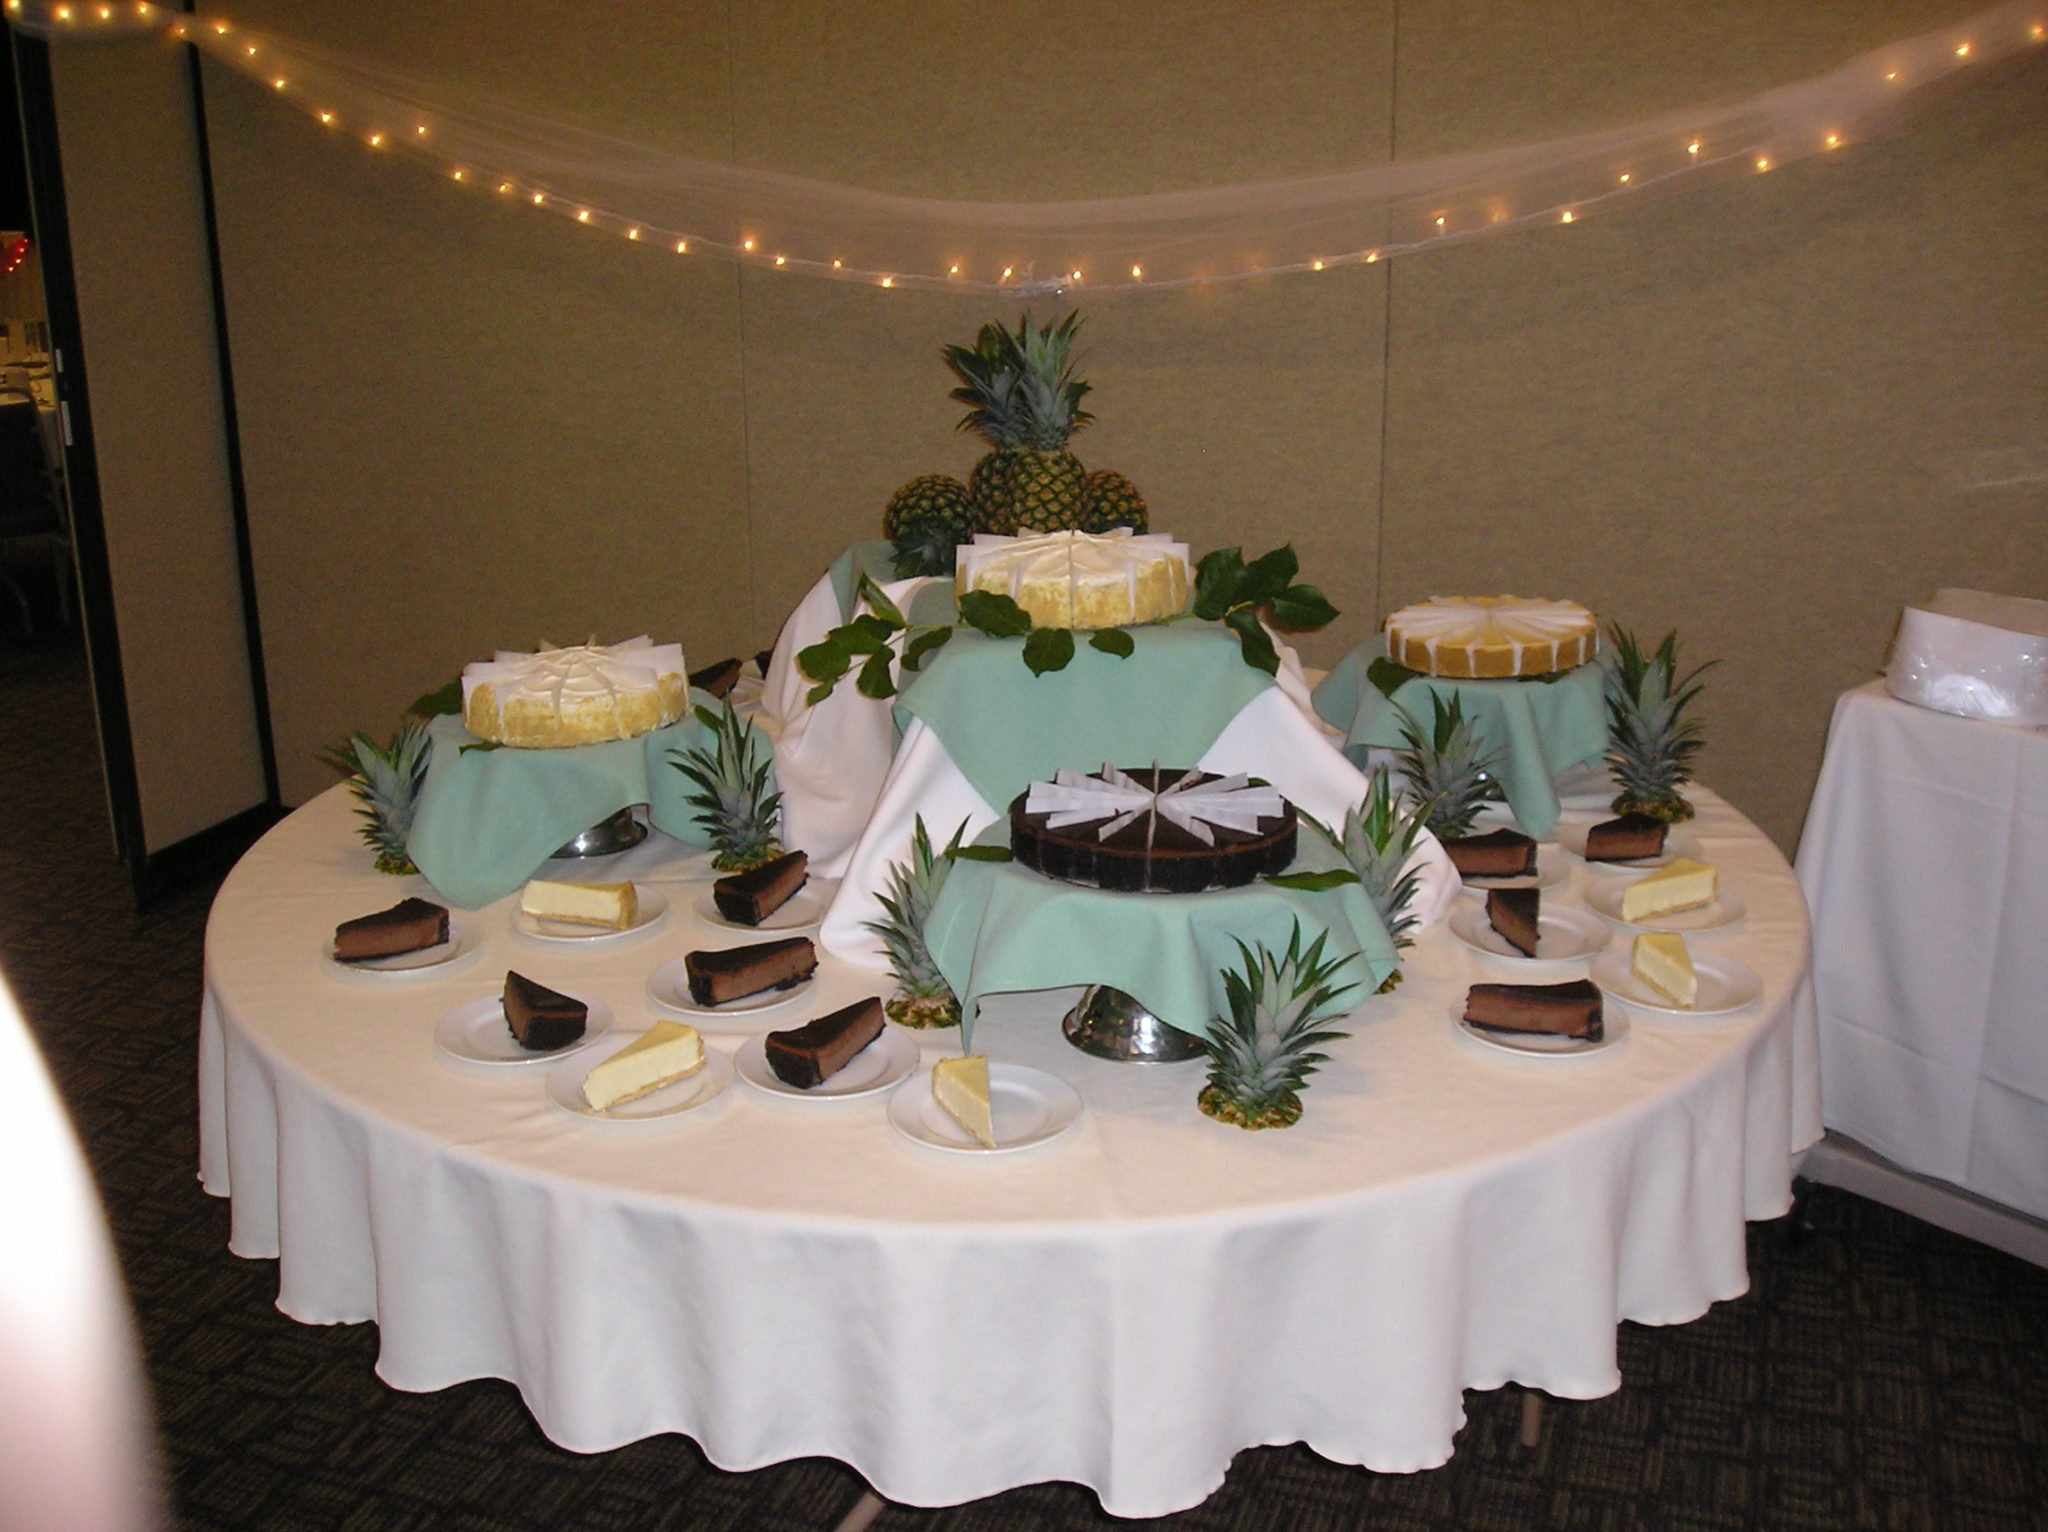 dessert table with variety of cakes